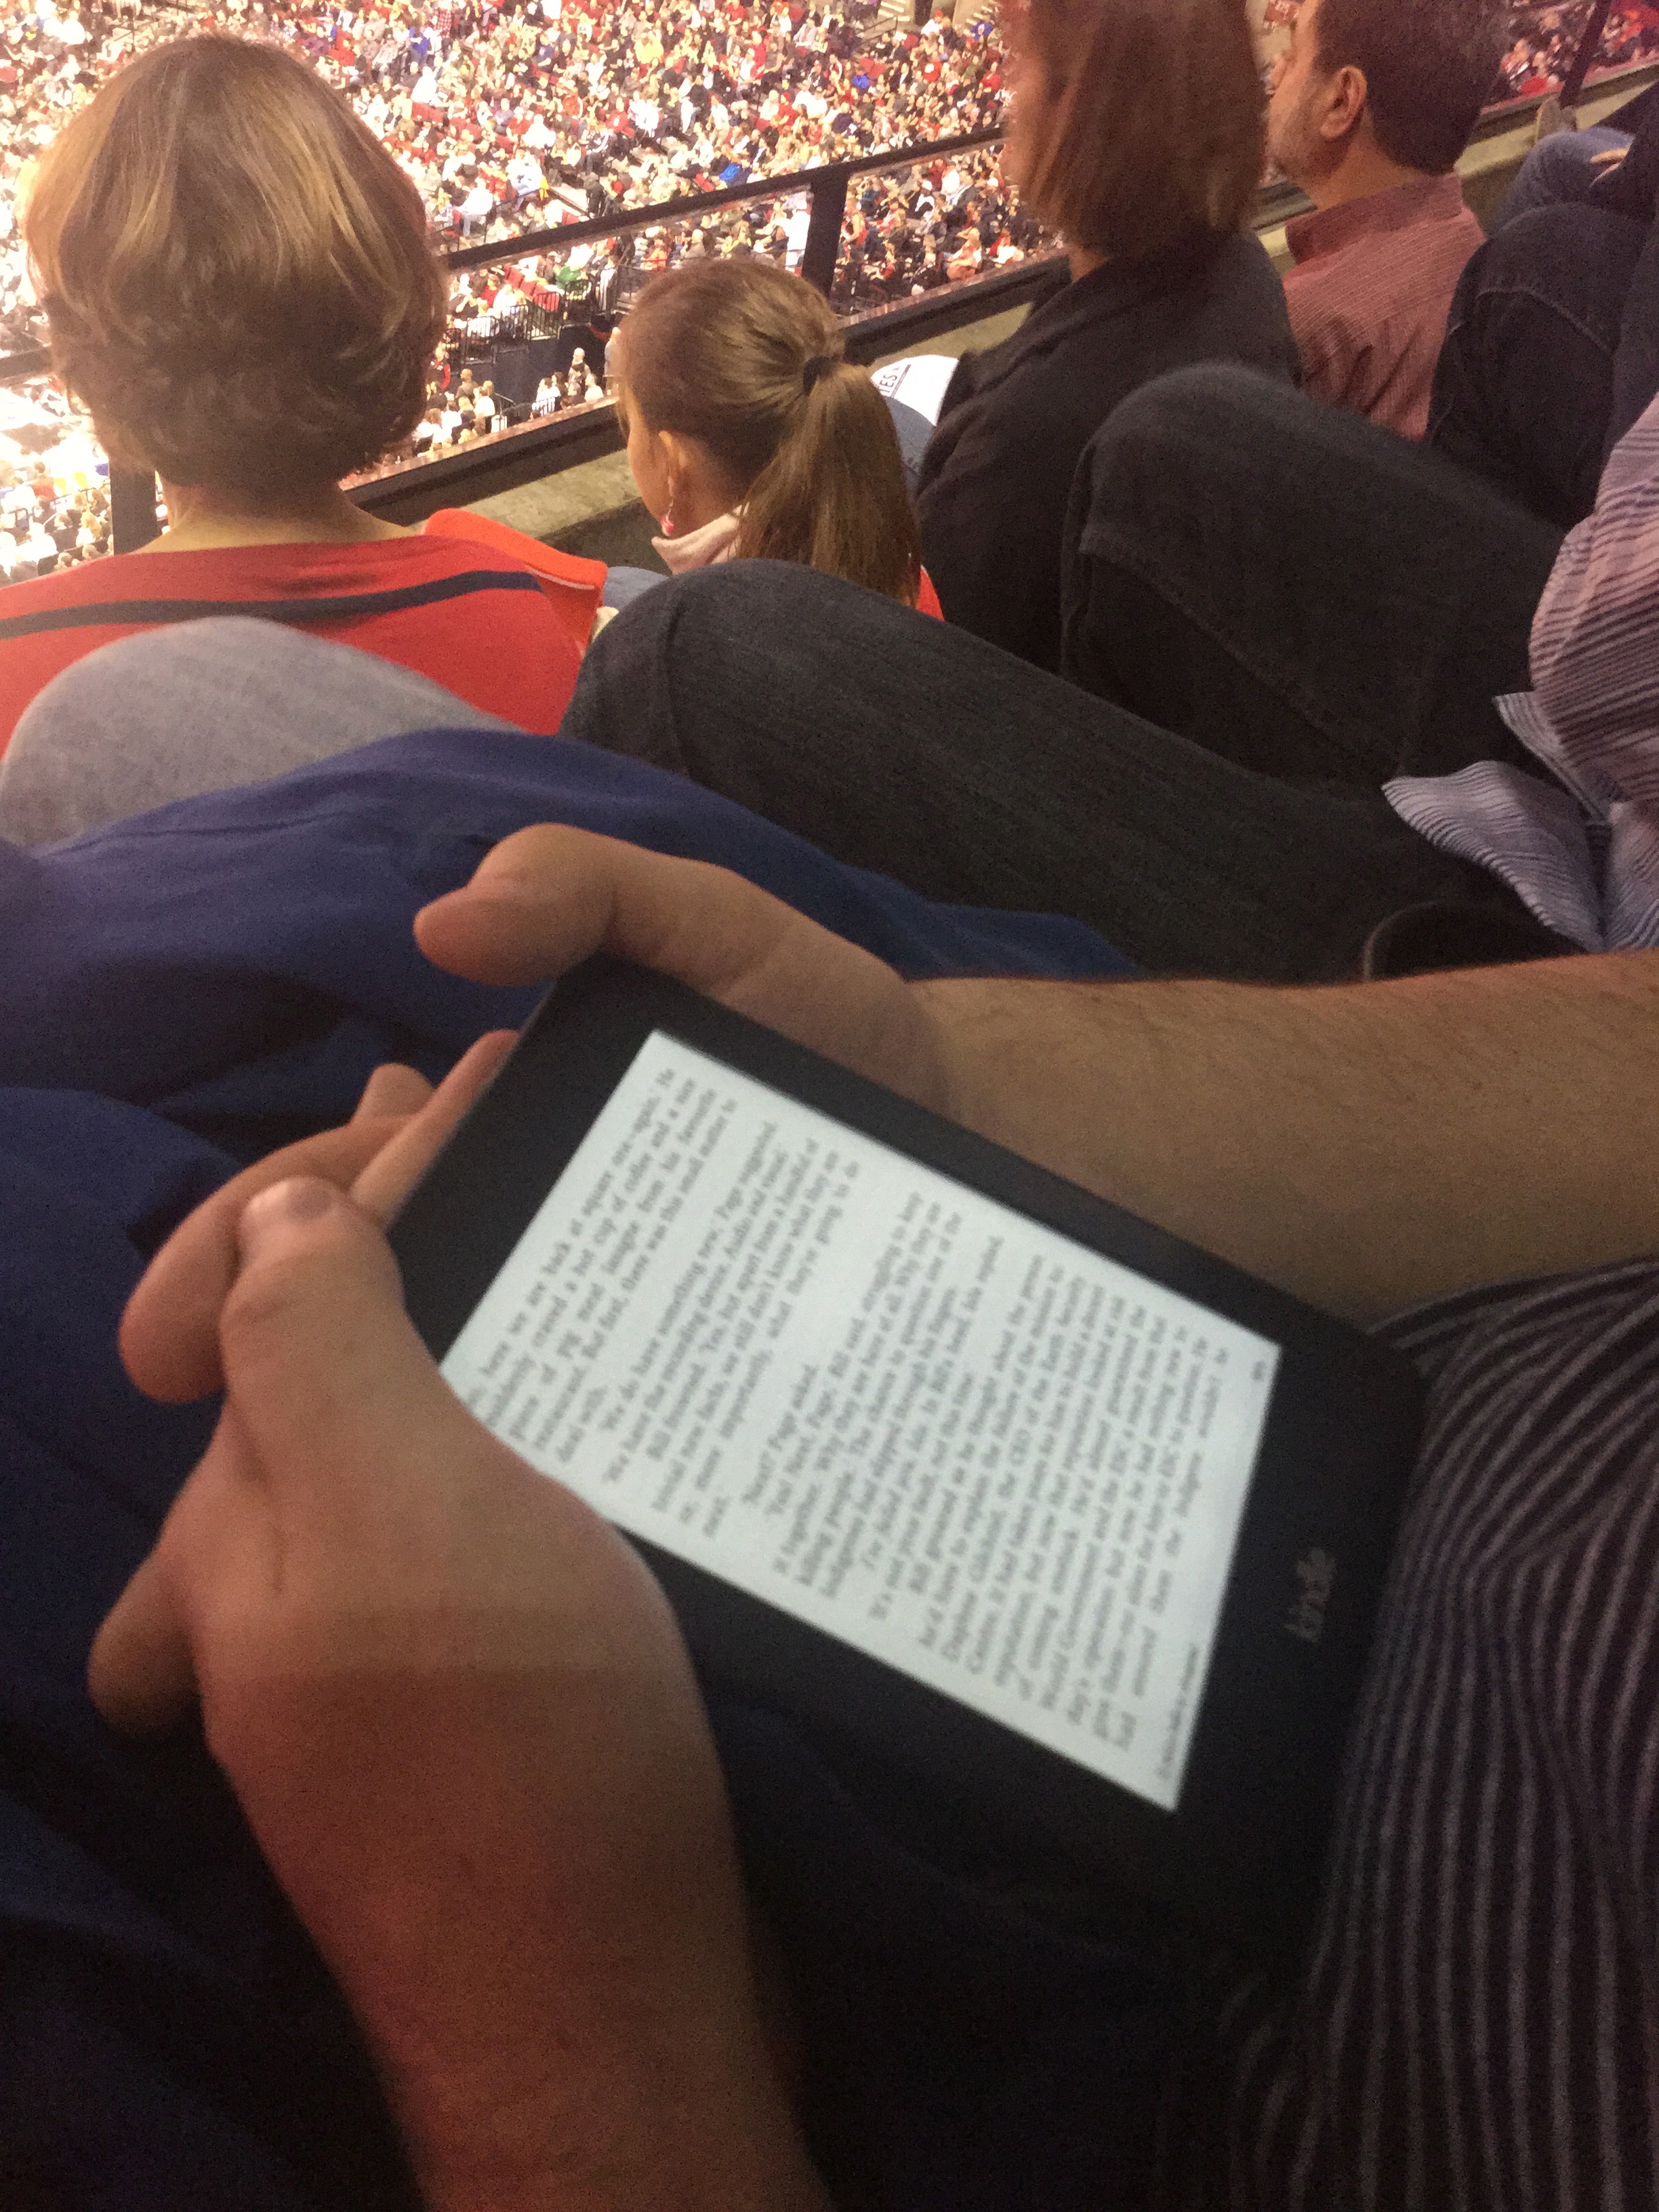 Yup I caught the Hubs reading his kindle!lol